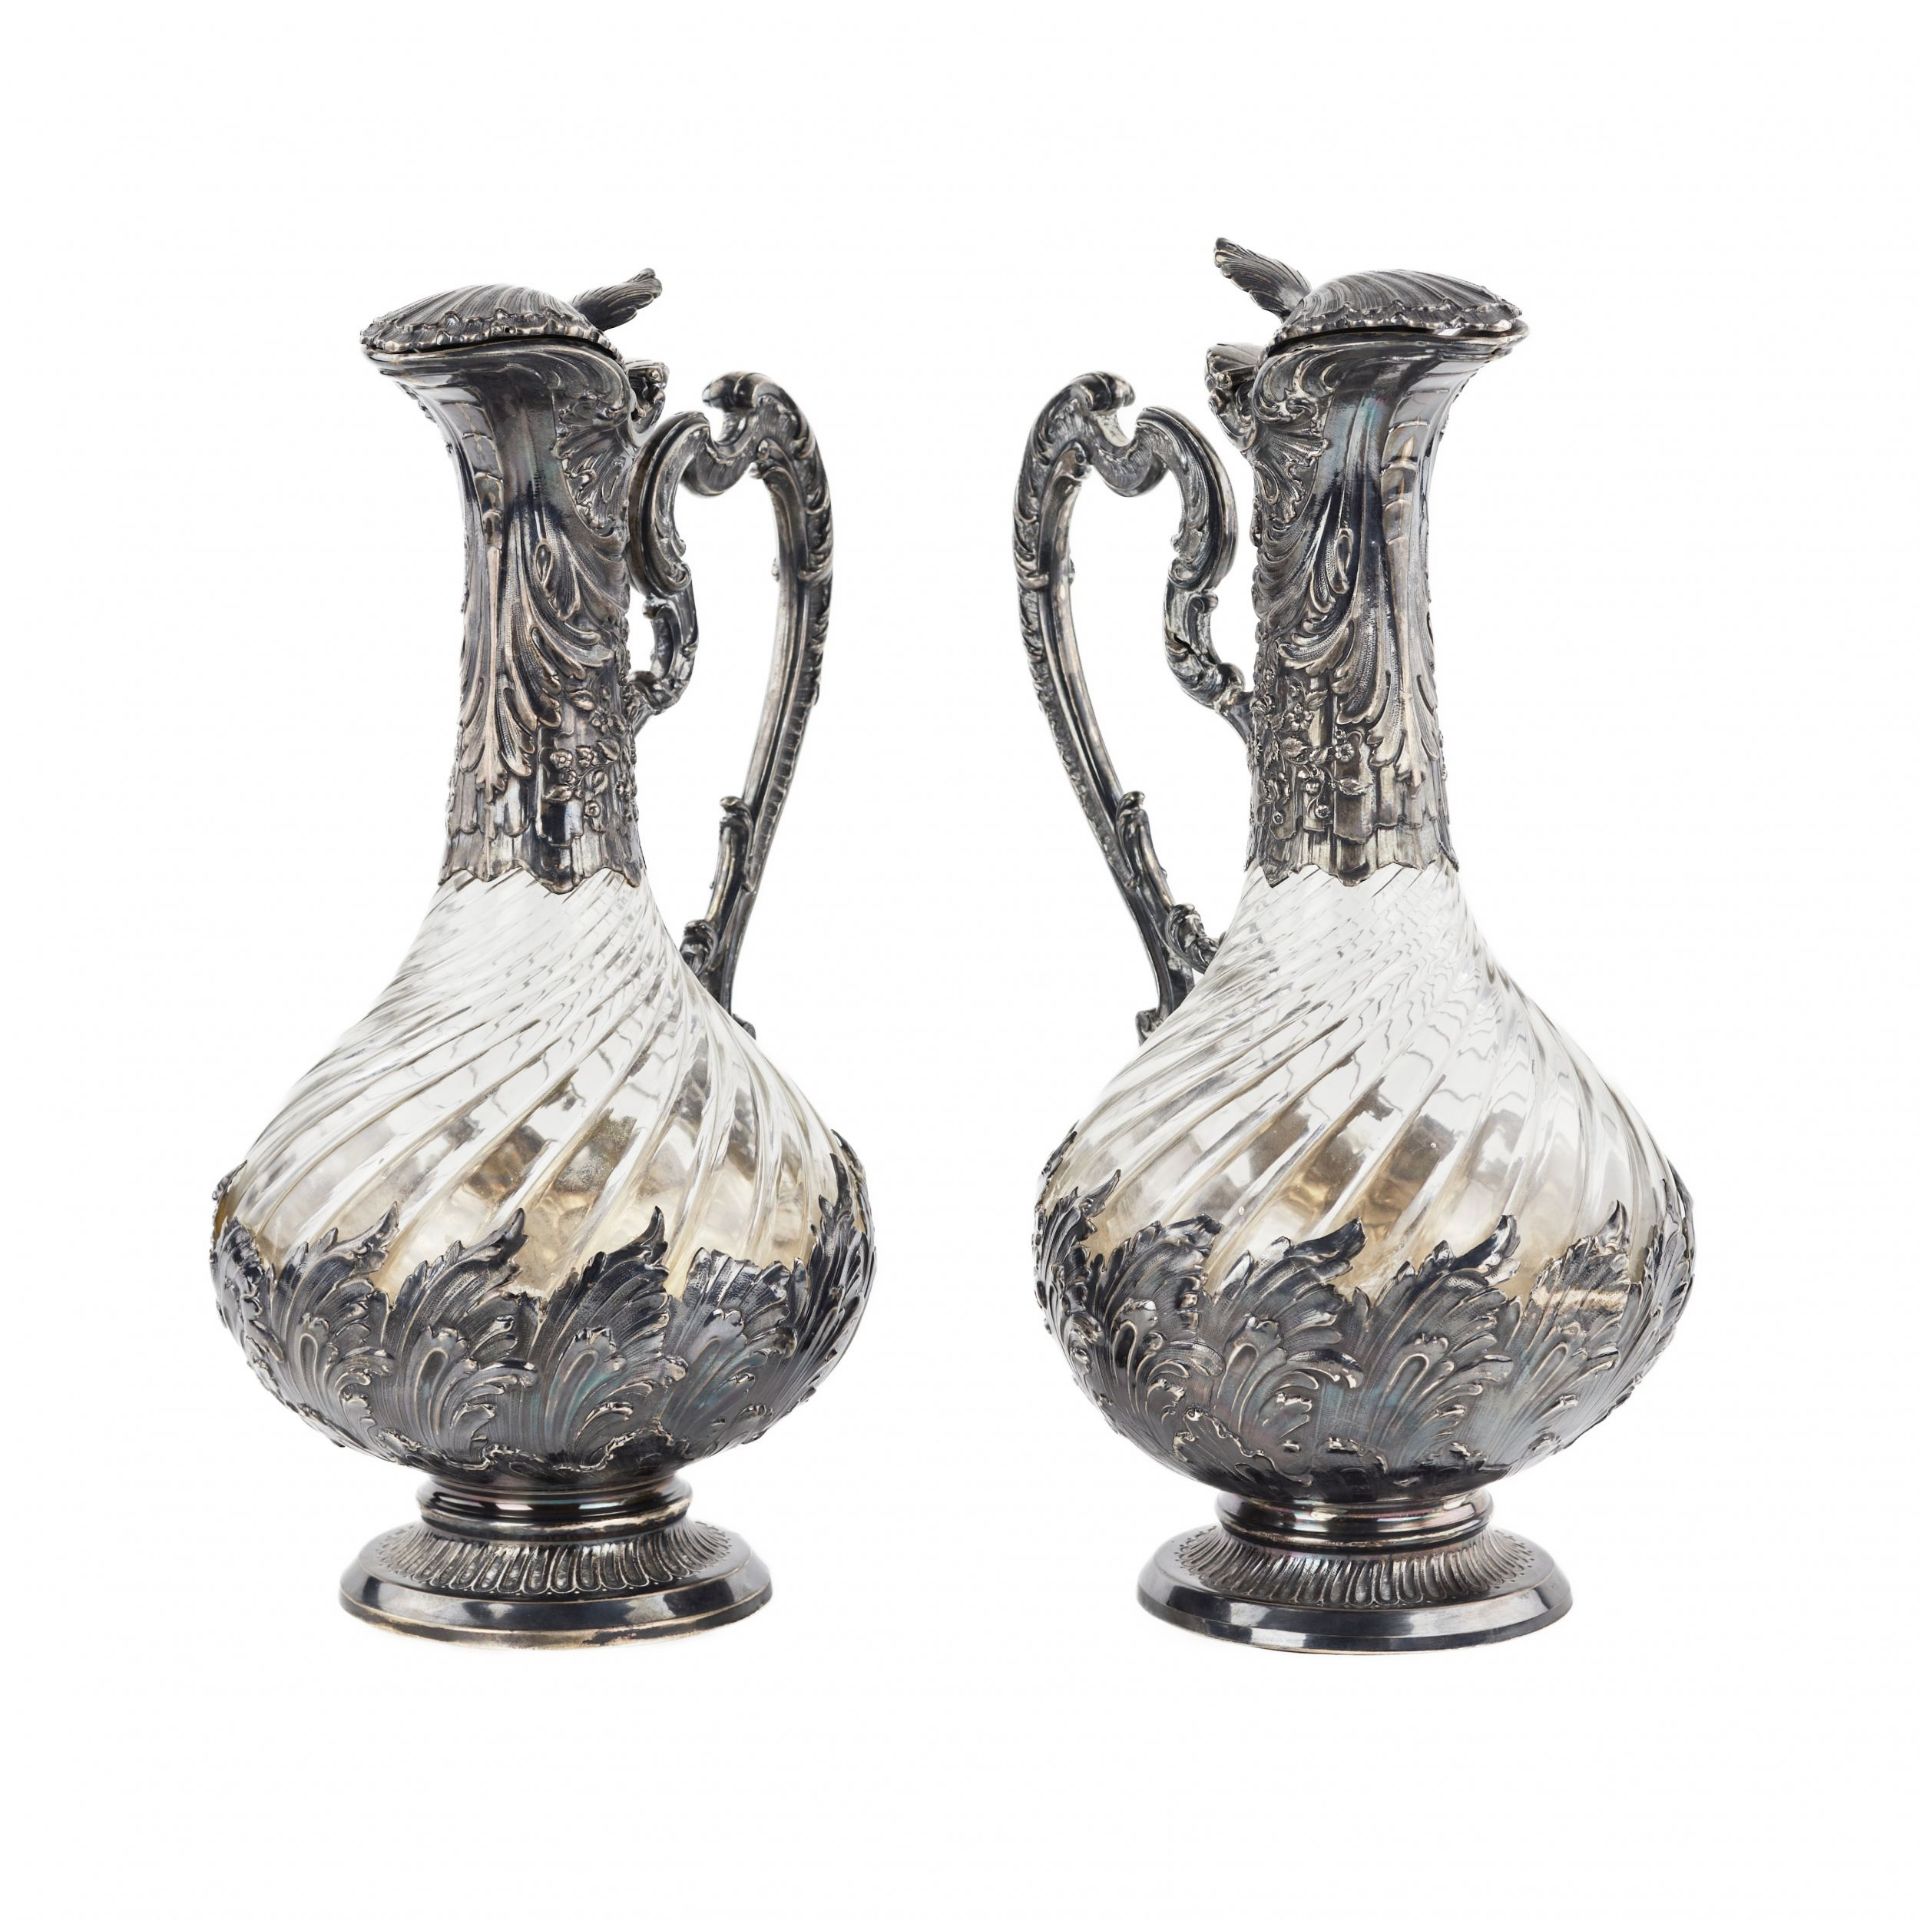 Frangiere & Laroche. Pair of French glass wine jugs in silver from the 1880s. - Bild 3 aus 9